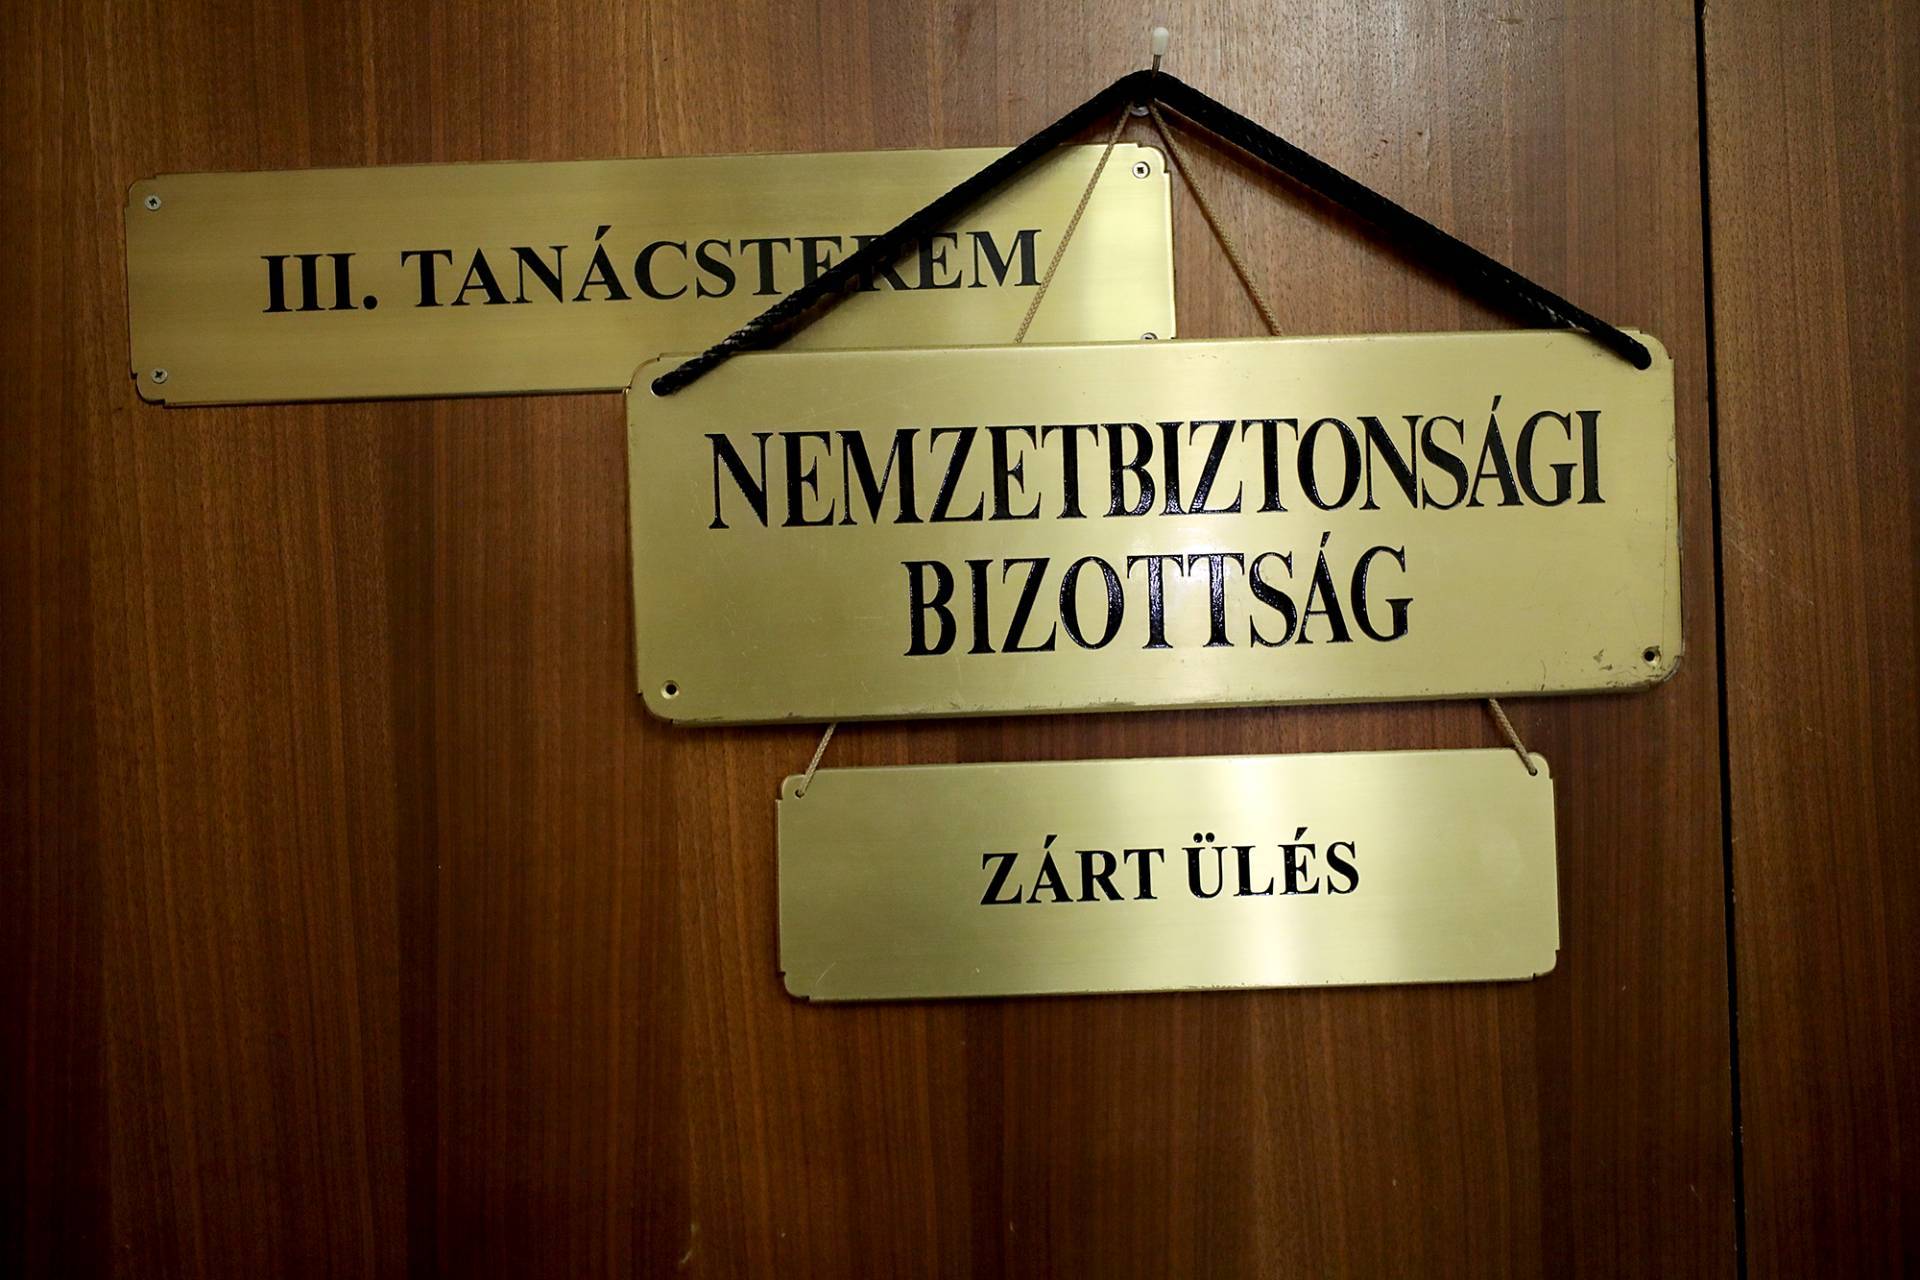 national security committee hungary parliament